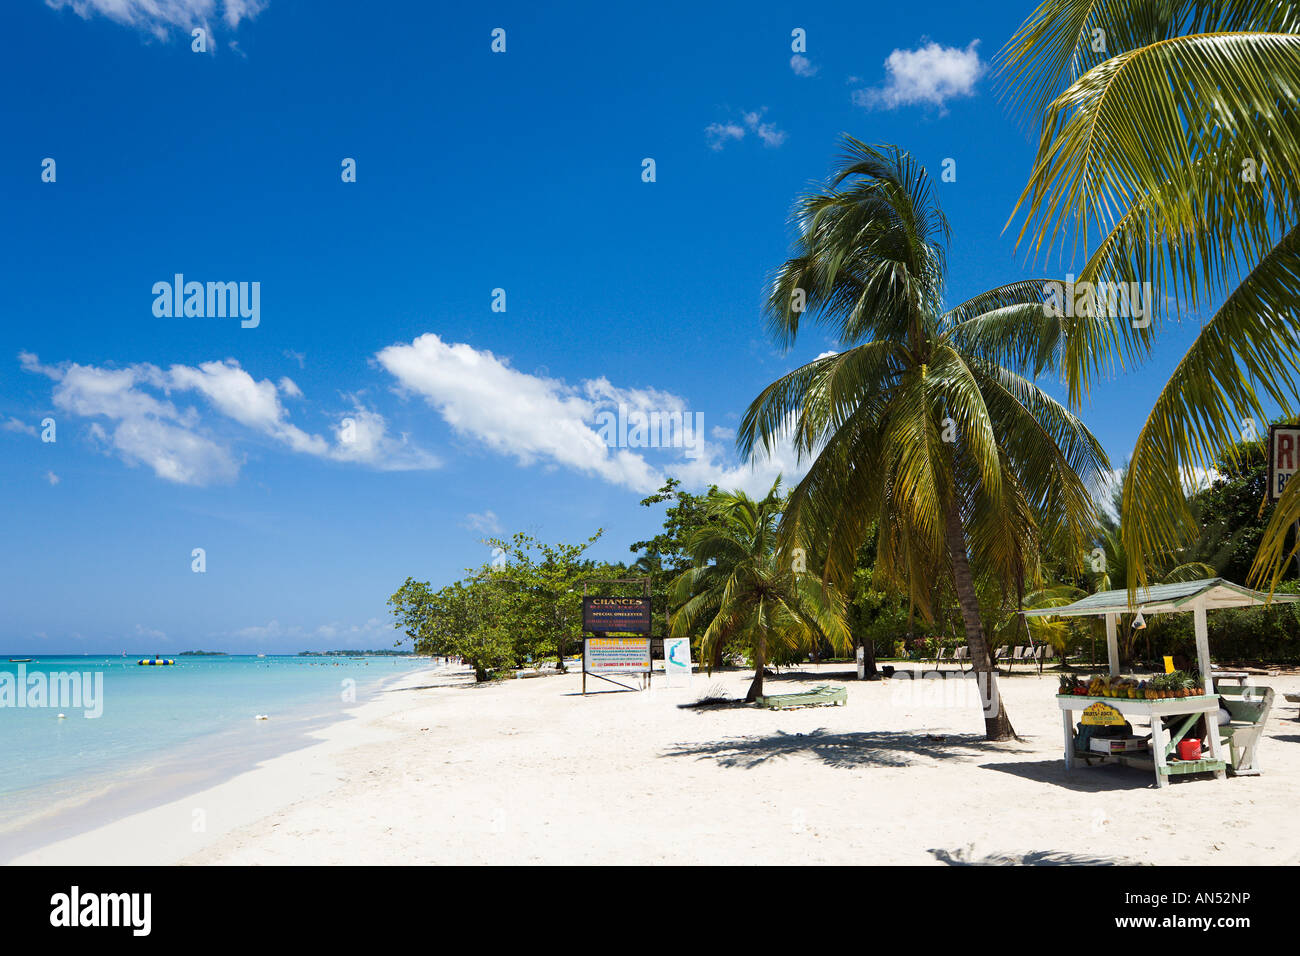 Seven Mile Beach, "Long Bay', Negril, in Giamaica, Caraibi, West Indies Foto Stock